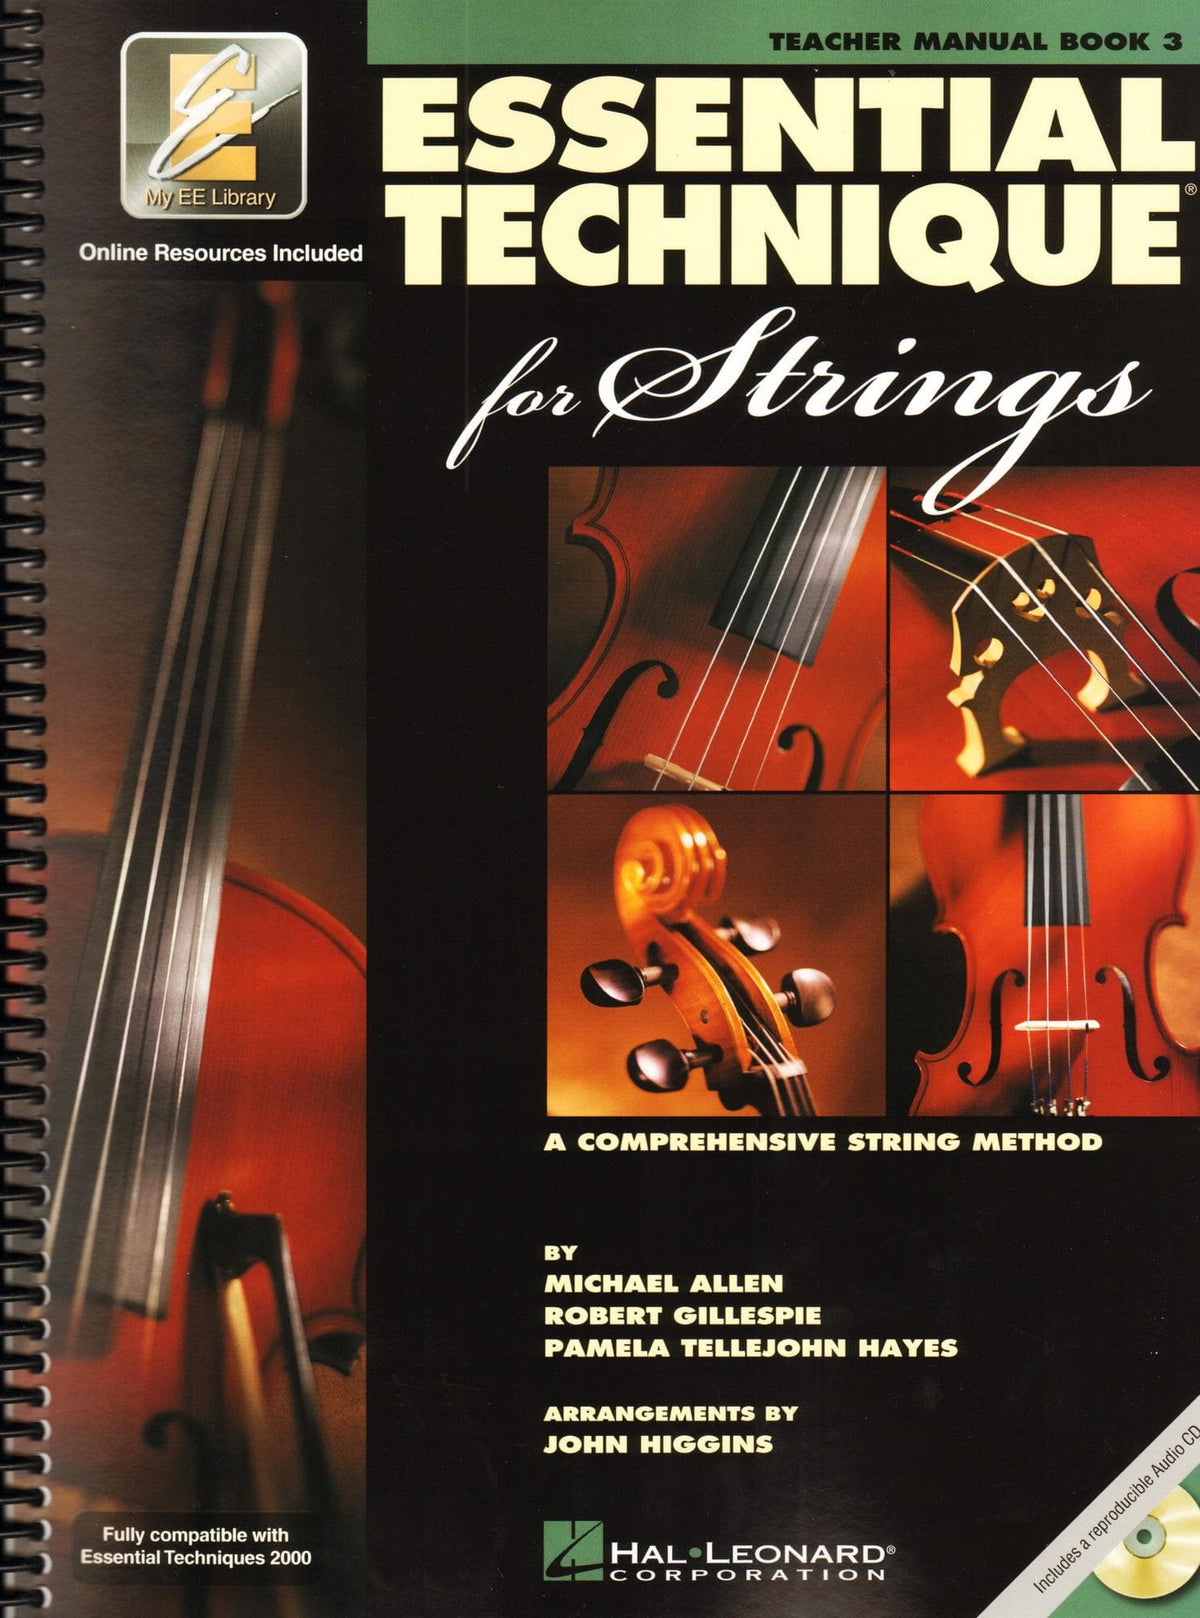 Essential Technique Interactive (formerly 2000) for Strings - Teacher Manual Book 3 - with CD - by Allen/Gillespie/Hayes - Hal Leonard Publication